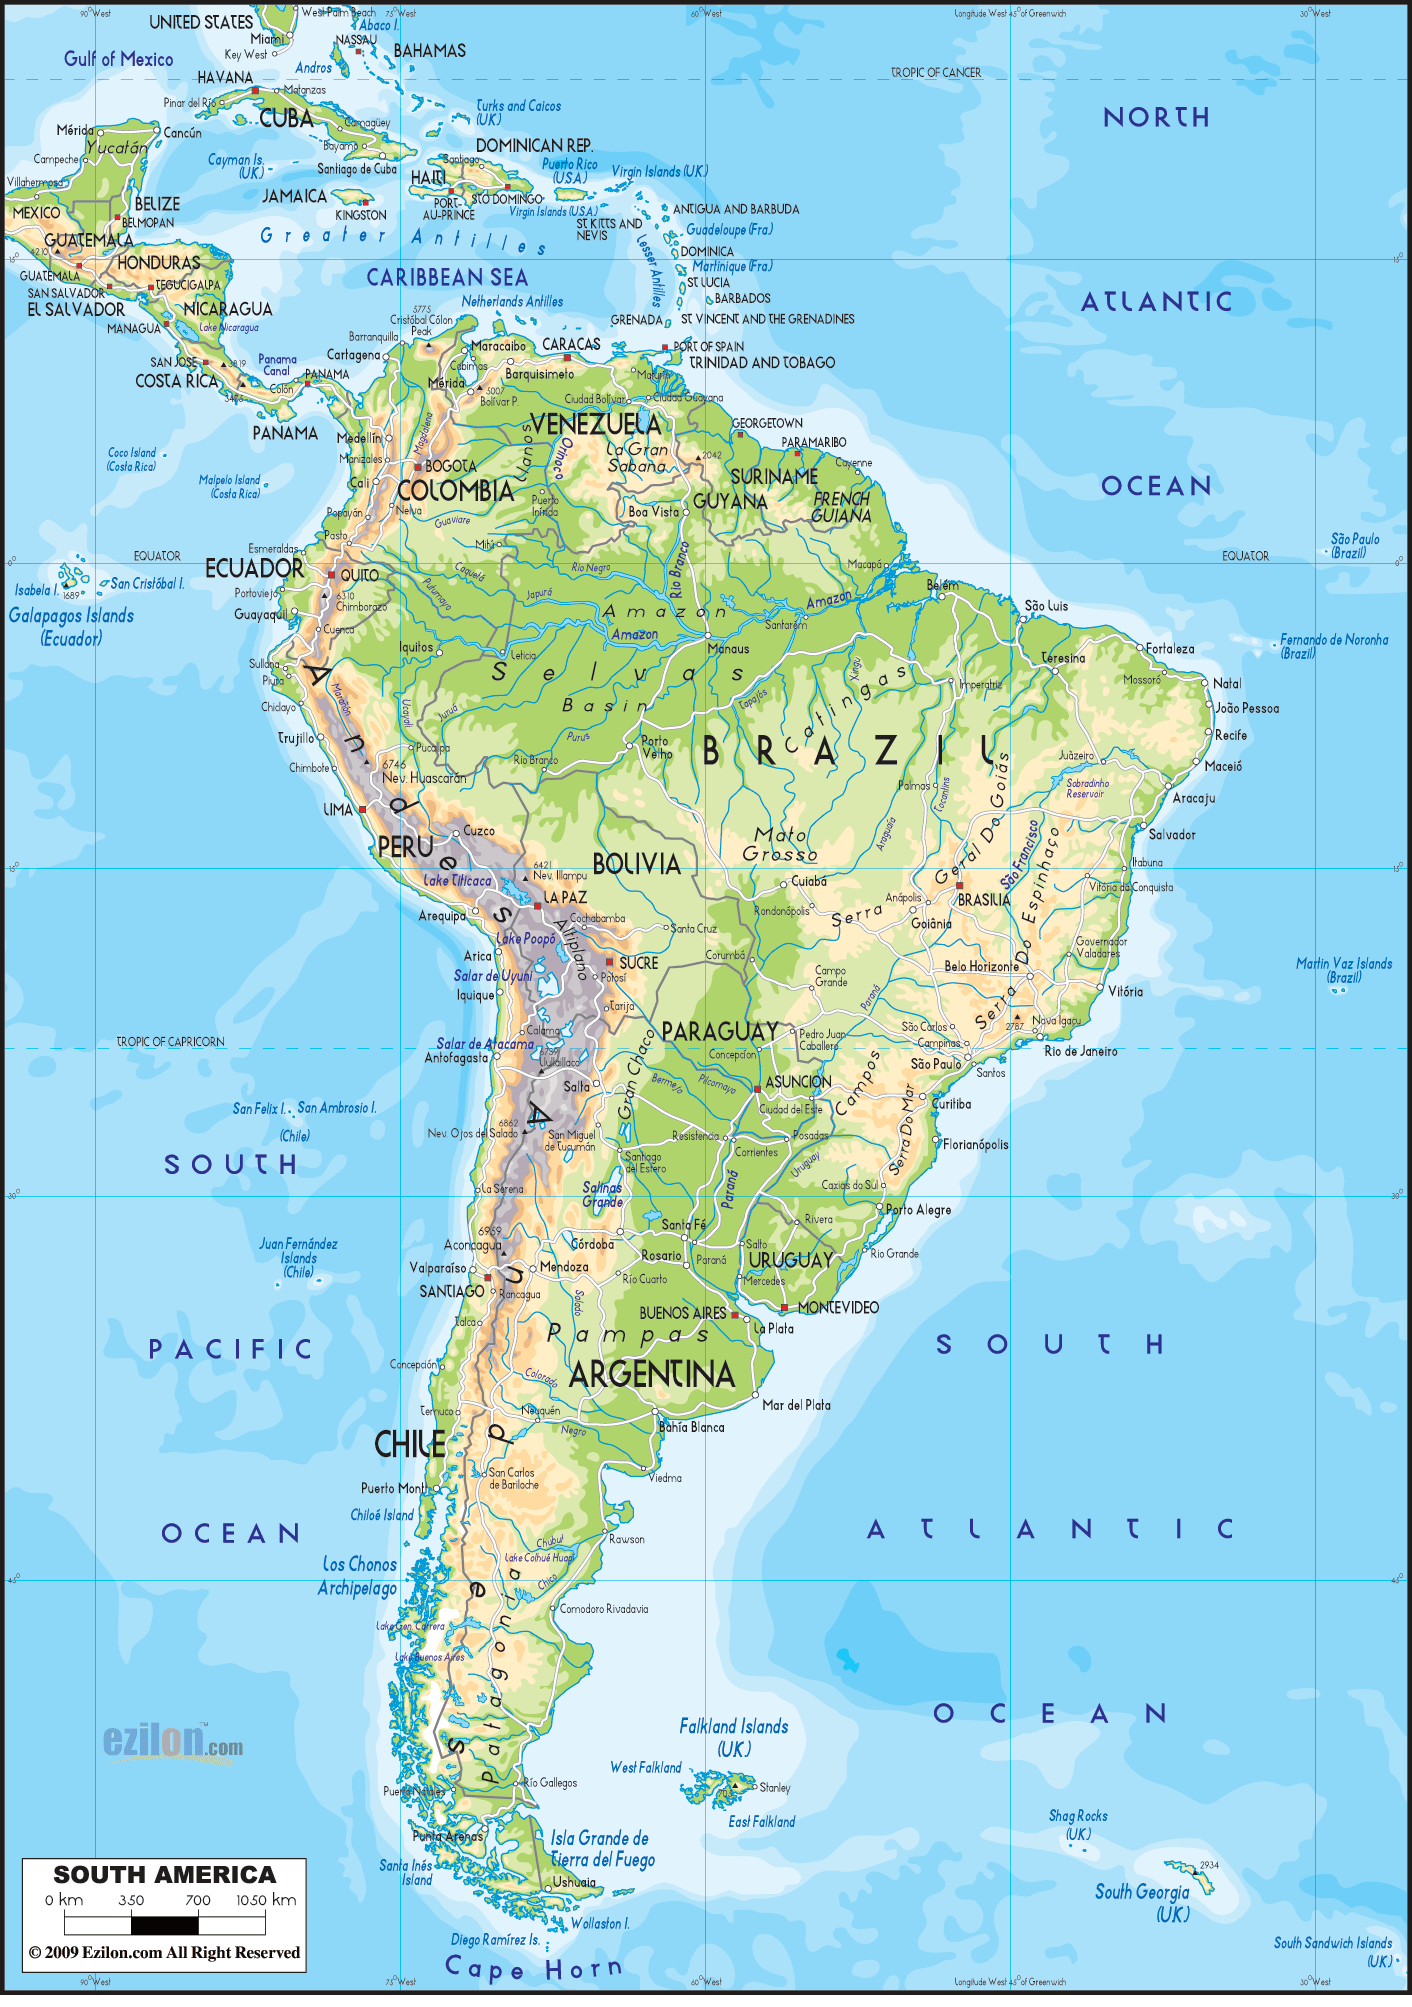 latin america physical features map labeled Physical Map Of South America Ezilon Maps latin america physical features map labeled